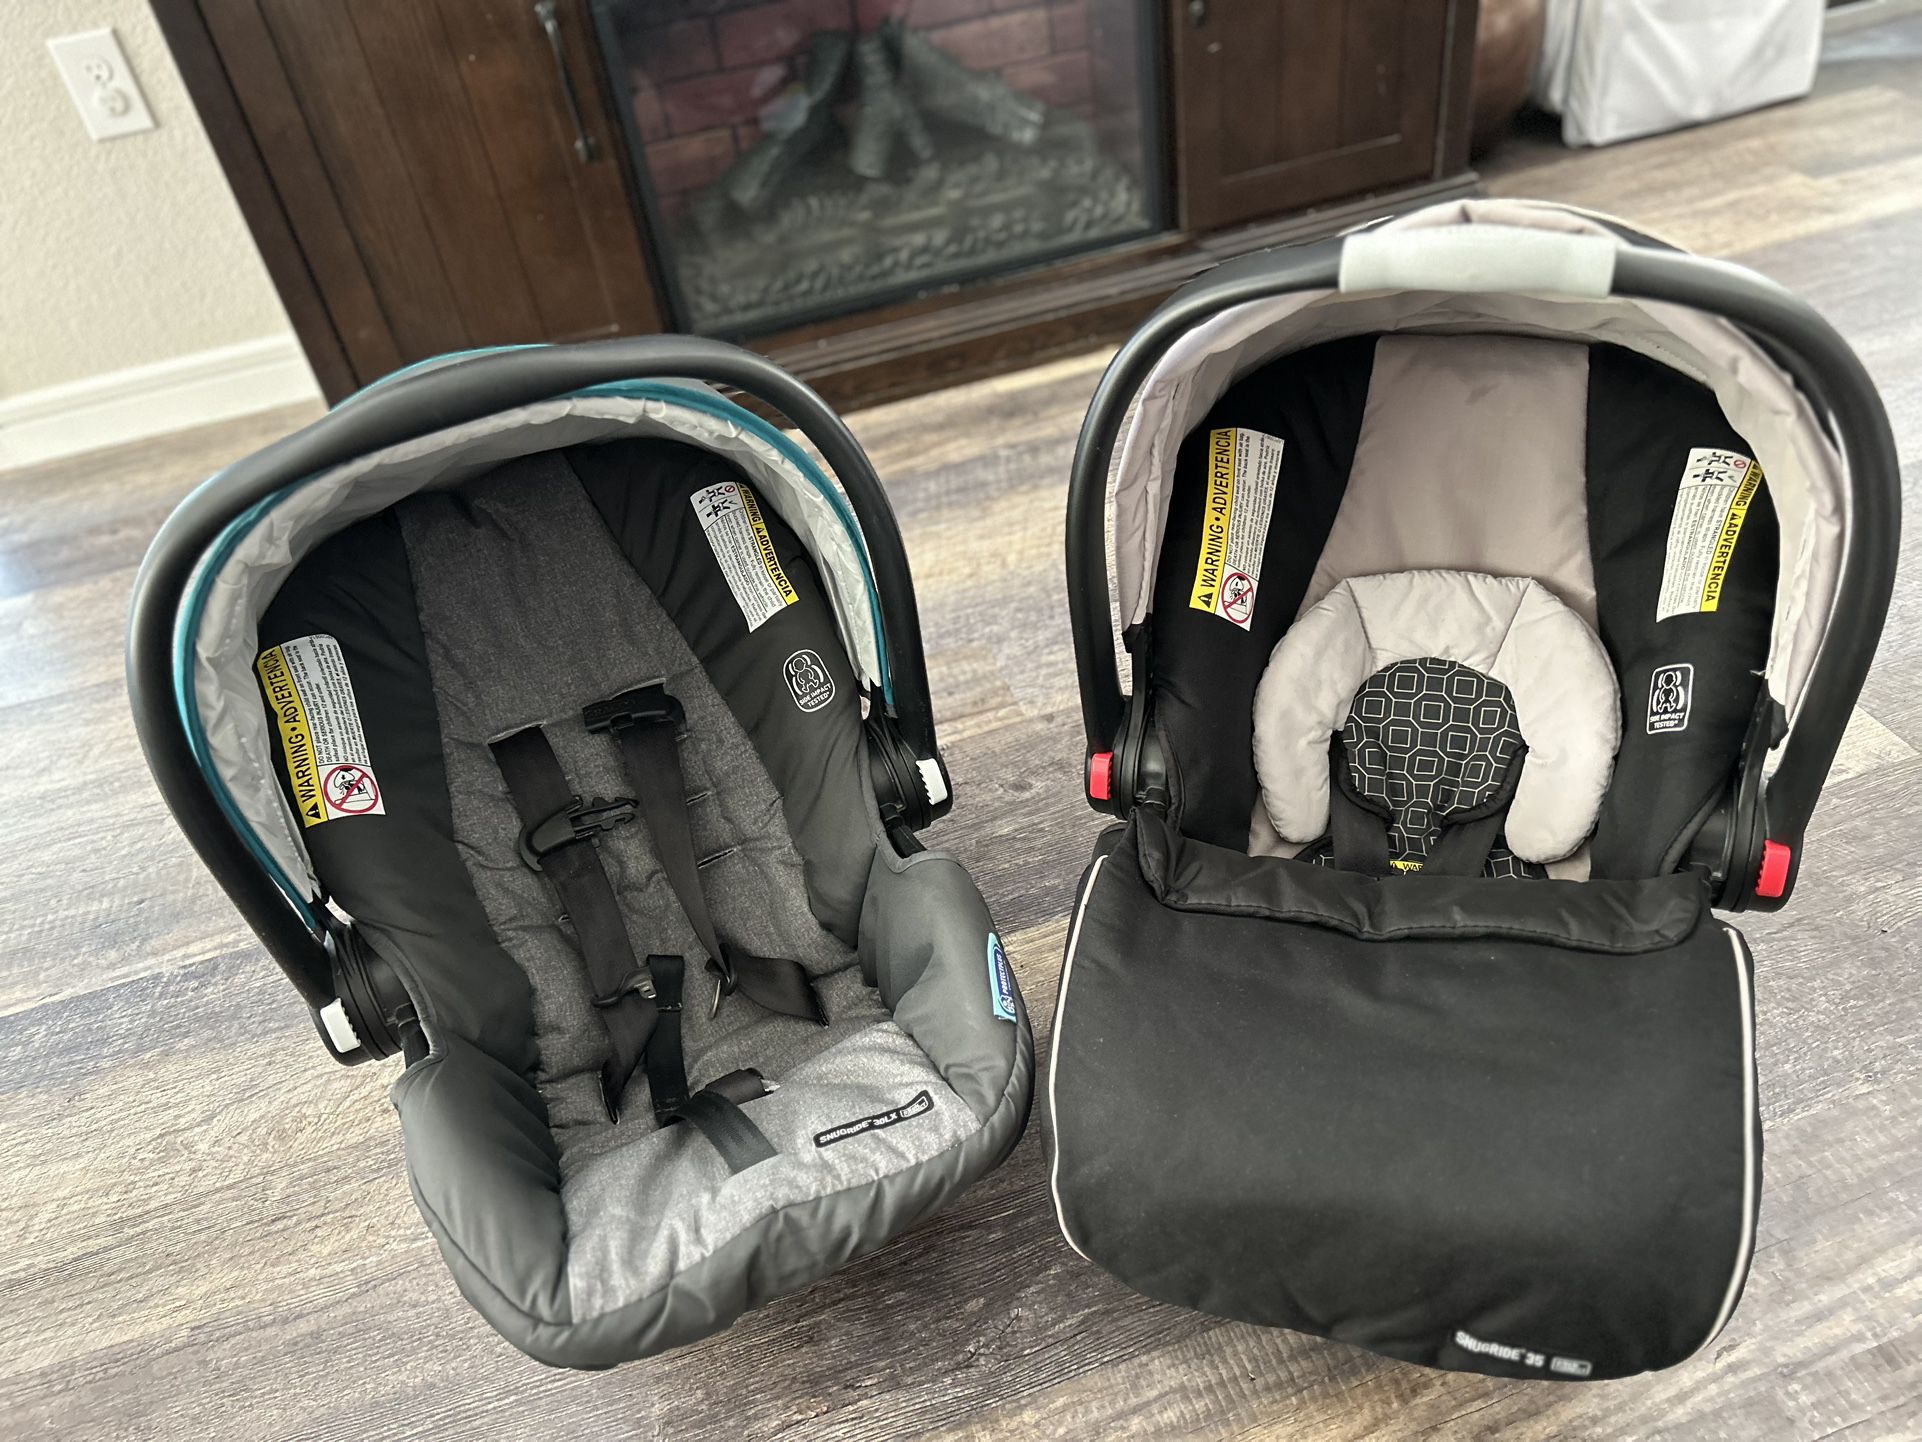 Graco Car Seat’s 2 For $100 